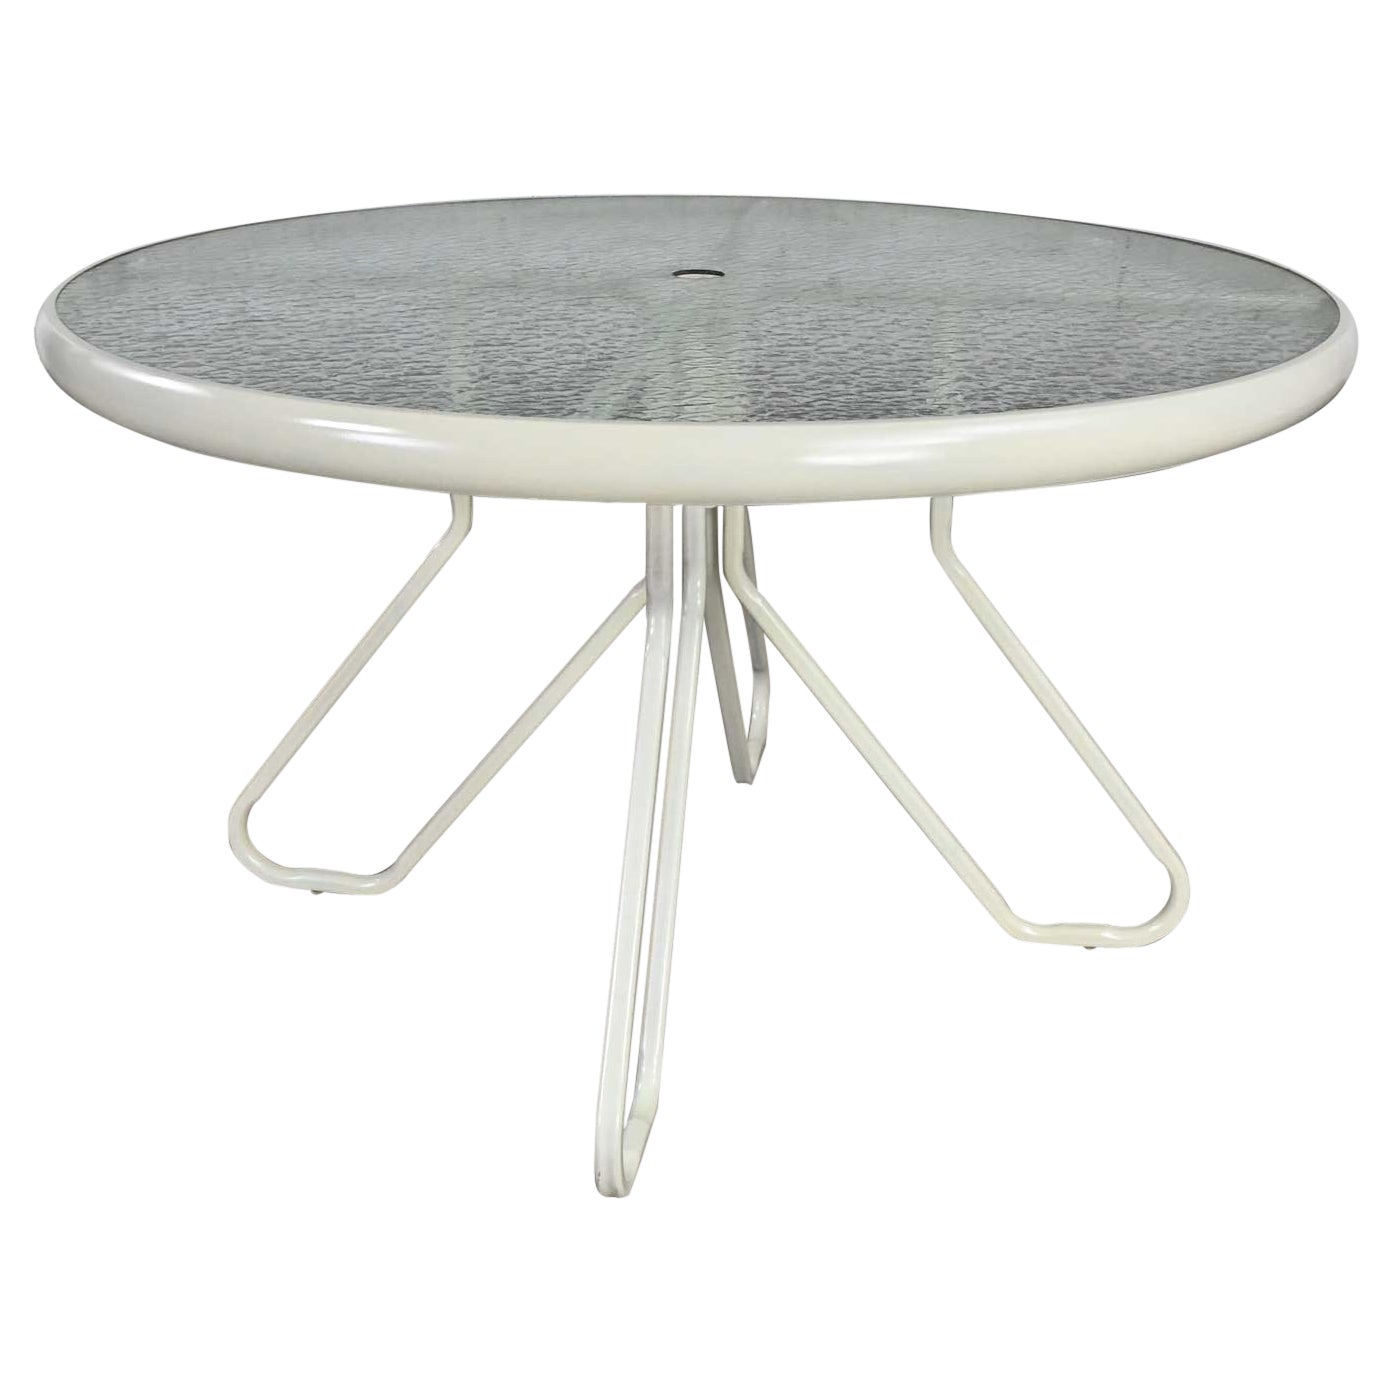 MCM Style Tropitone Outdoor Dining Table Pedestal Base Round Dimpled Glass Top For Sale